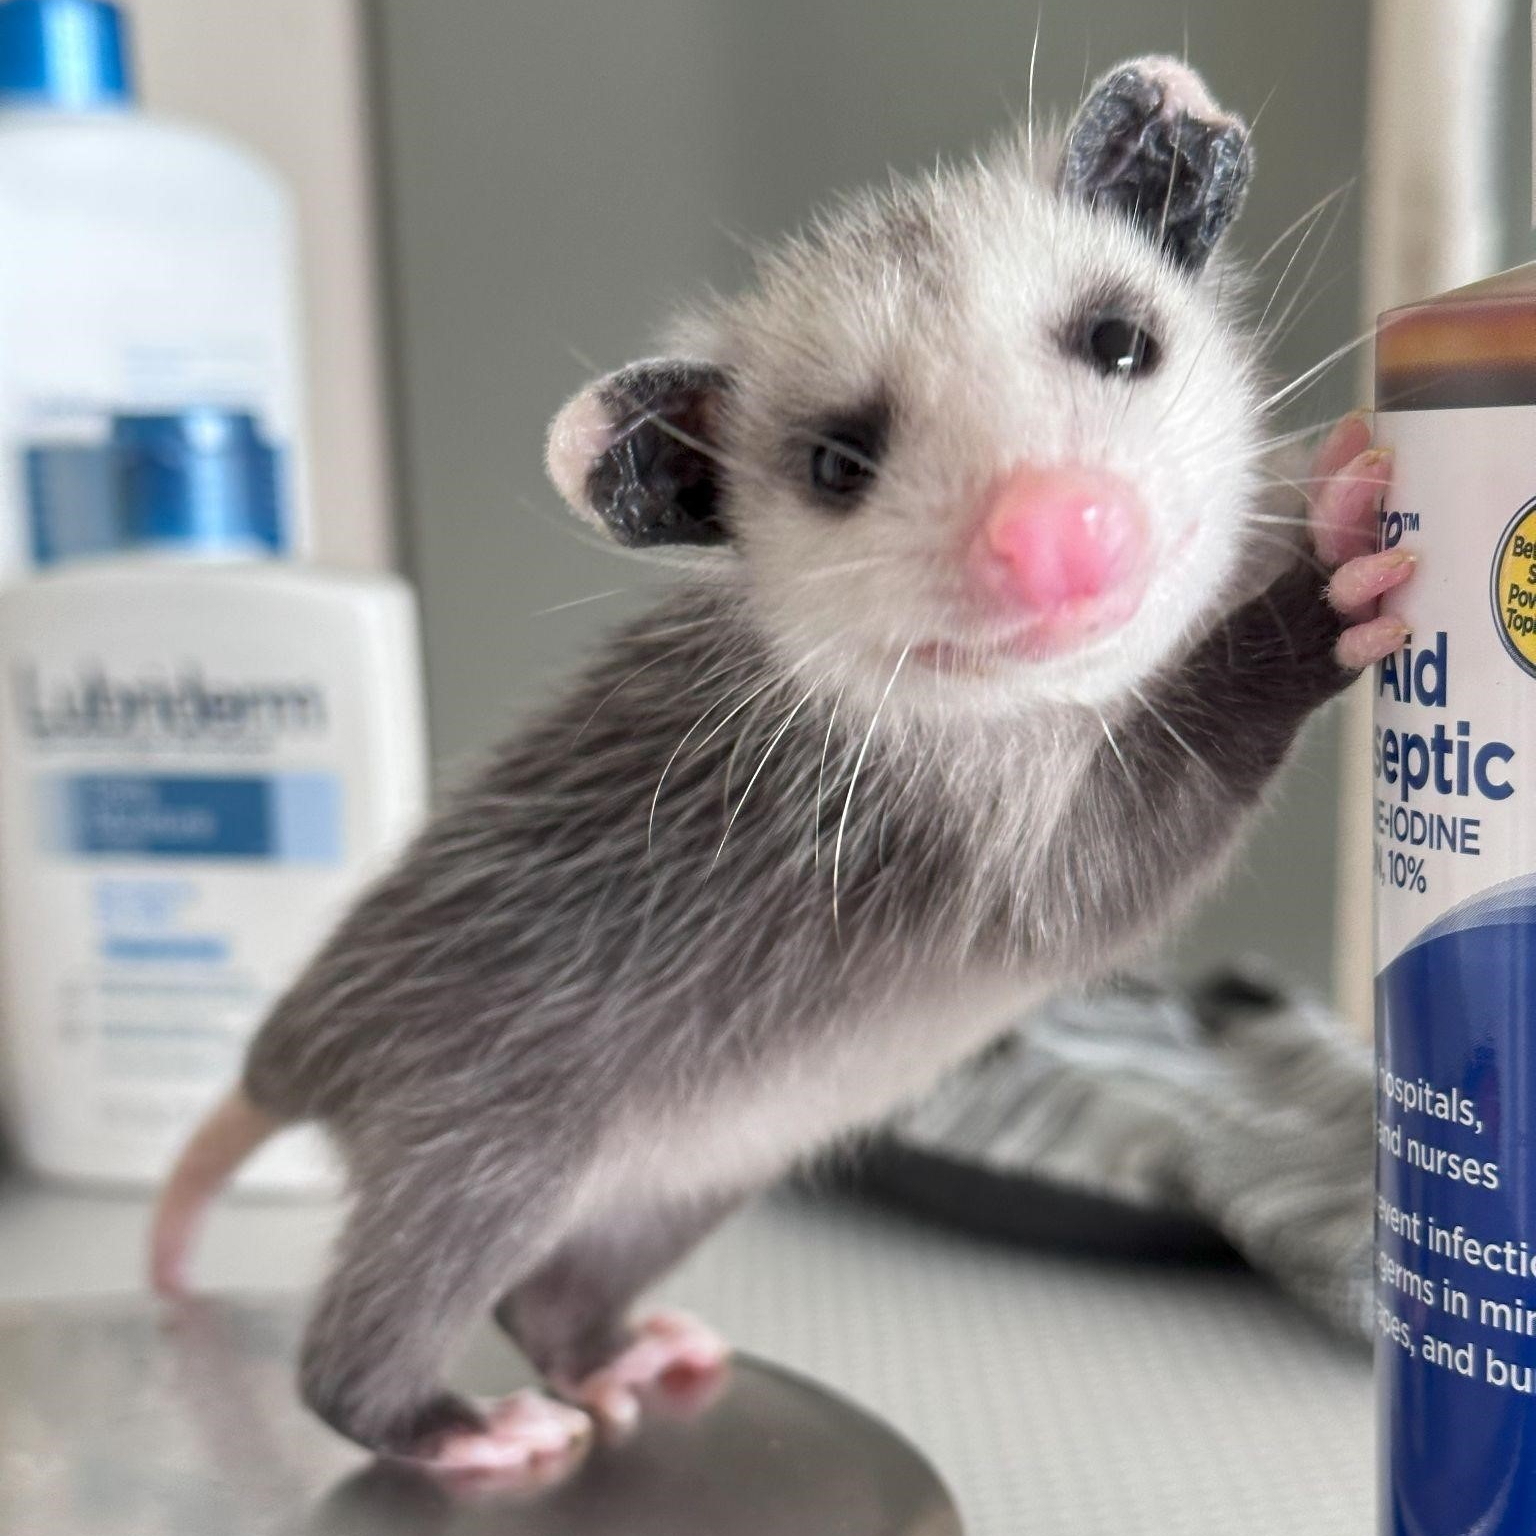 Possum standing on rear legs and leaning against a bottle